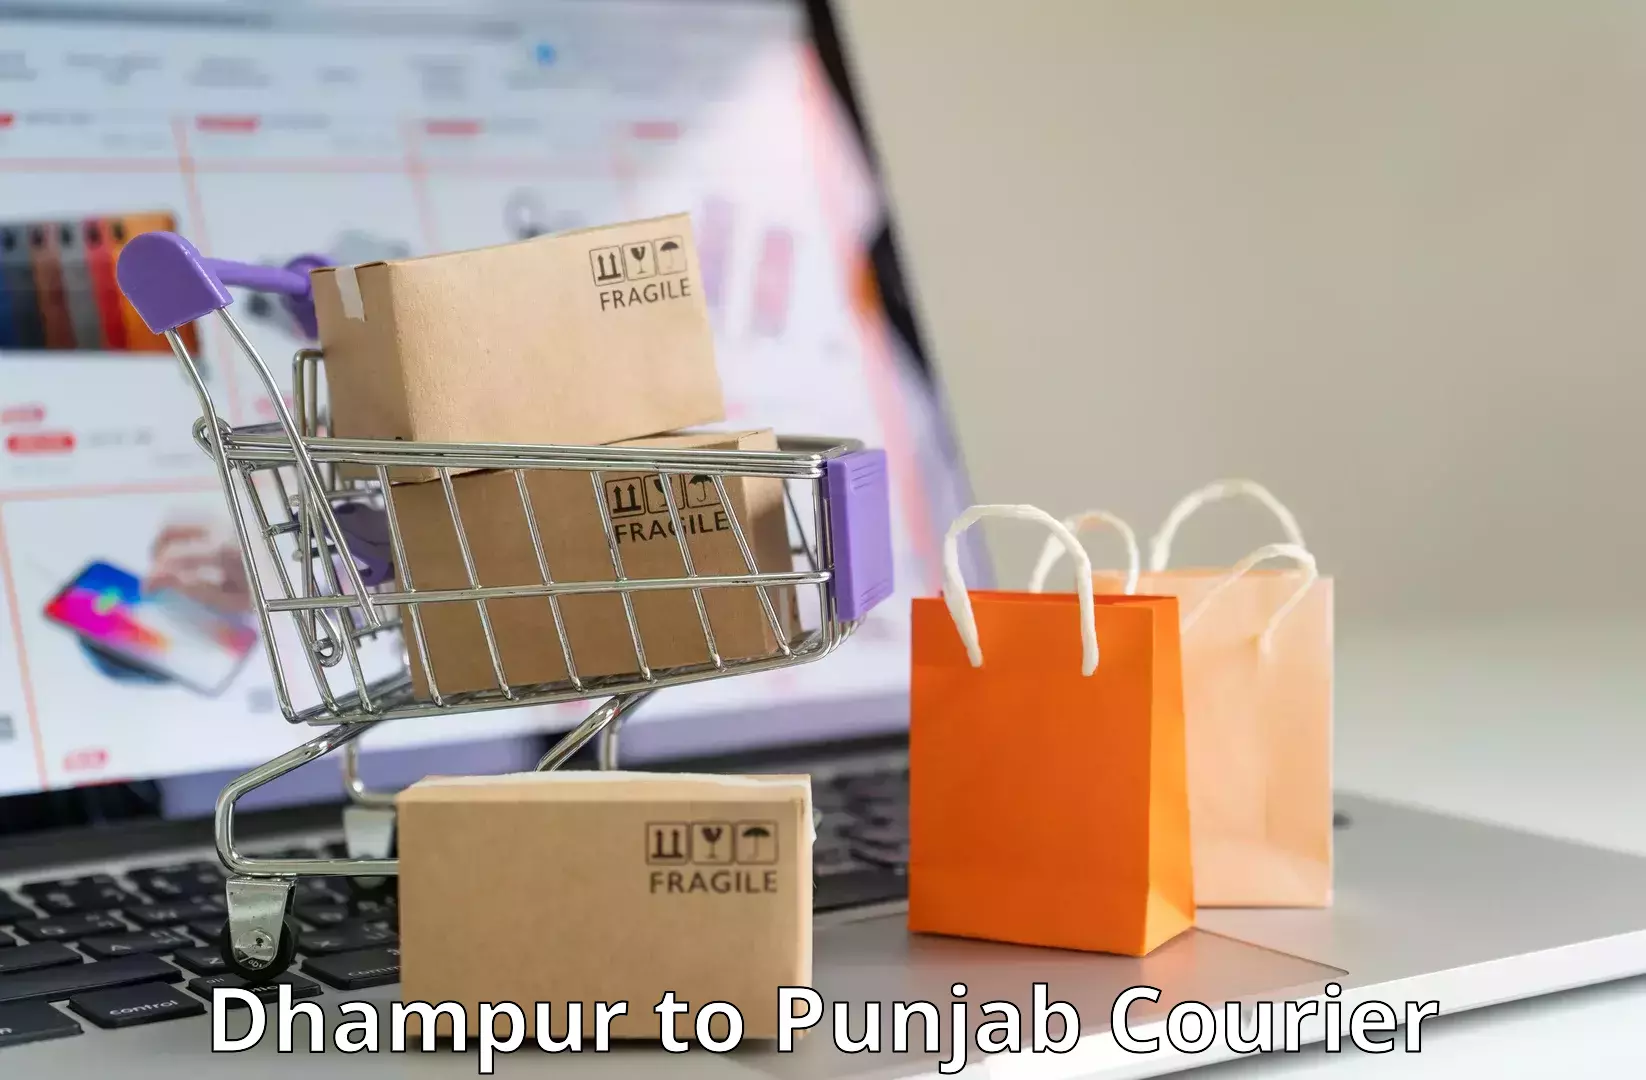 Lightweight courier Dhampur to Mohali